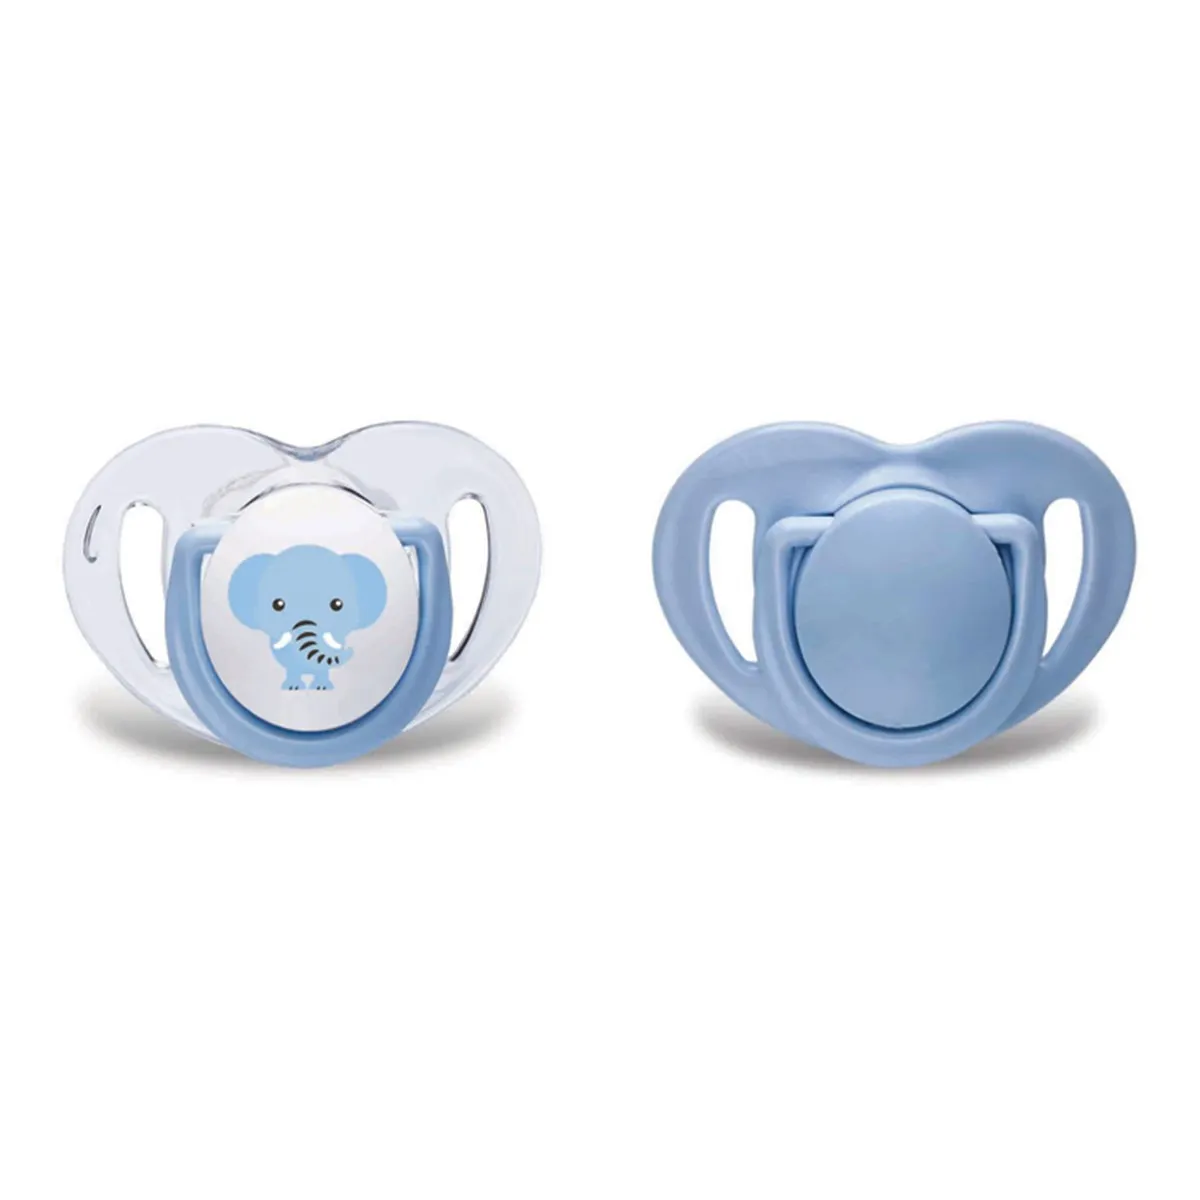 Maajoo silicone orthodontic double pacifier blue elephant/6 months +